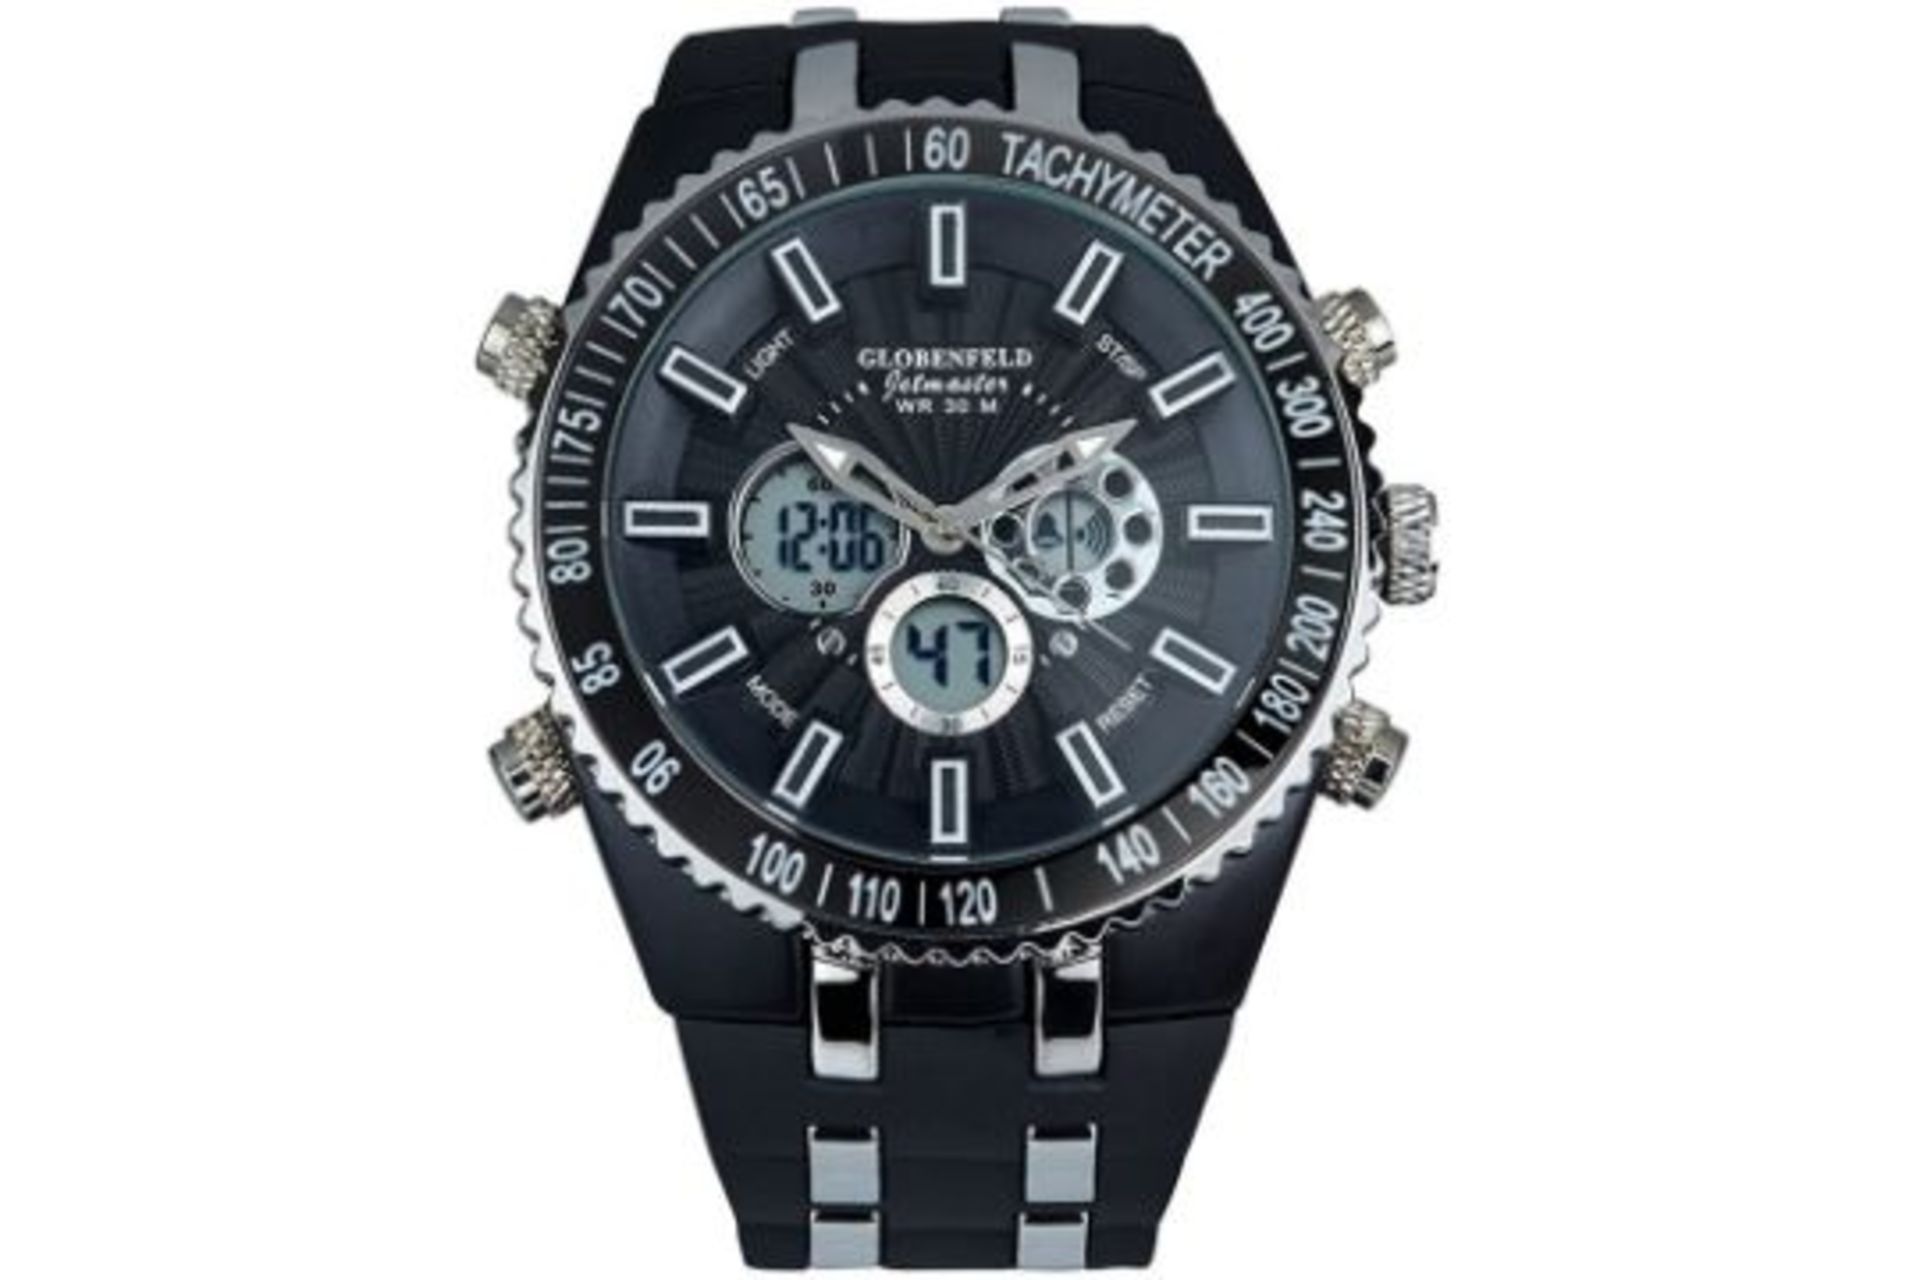 RRP £200 Globenfeld All Sports Activities Jetmaster Watch With Hard Wearing Rubber Bracelet. Jet